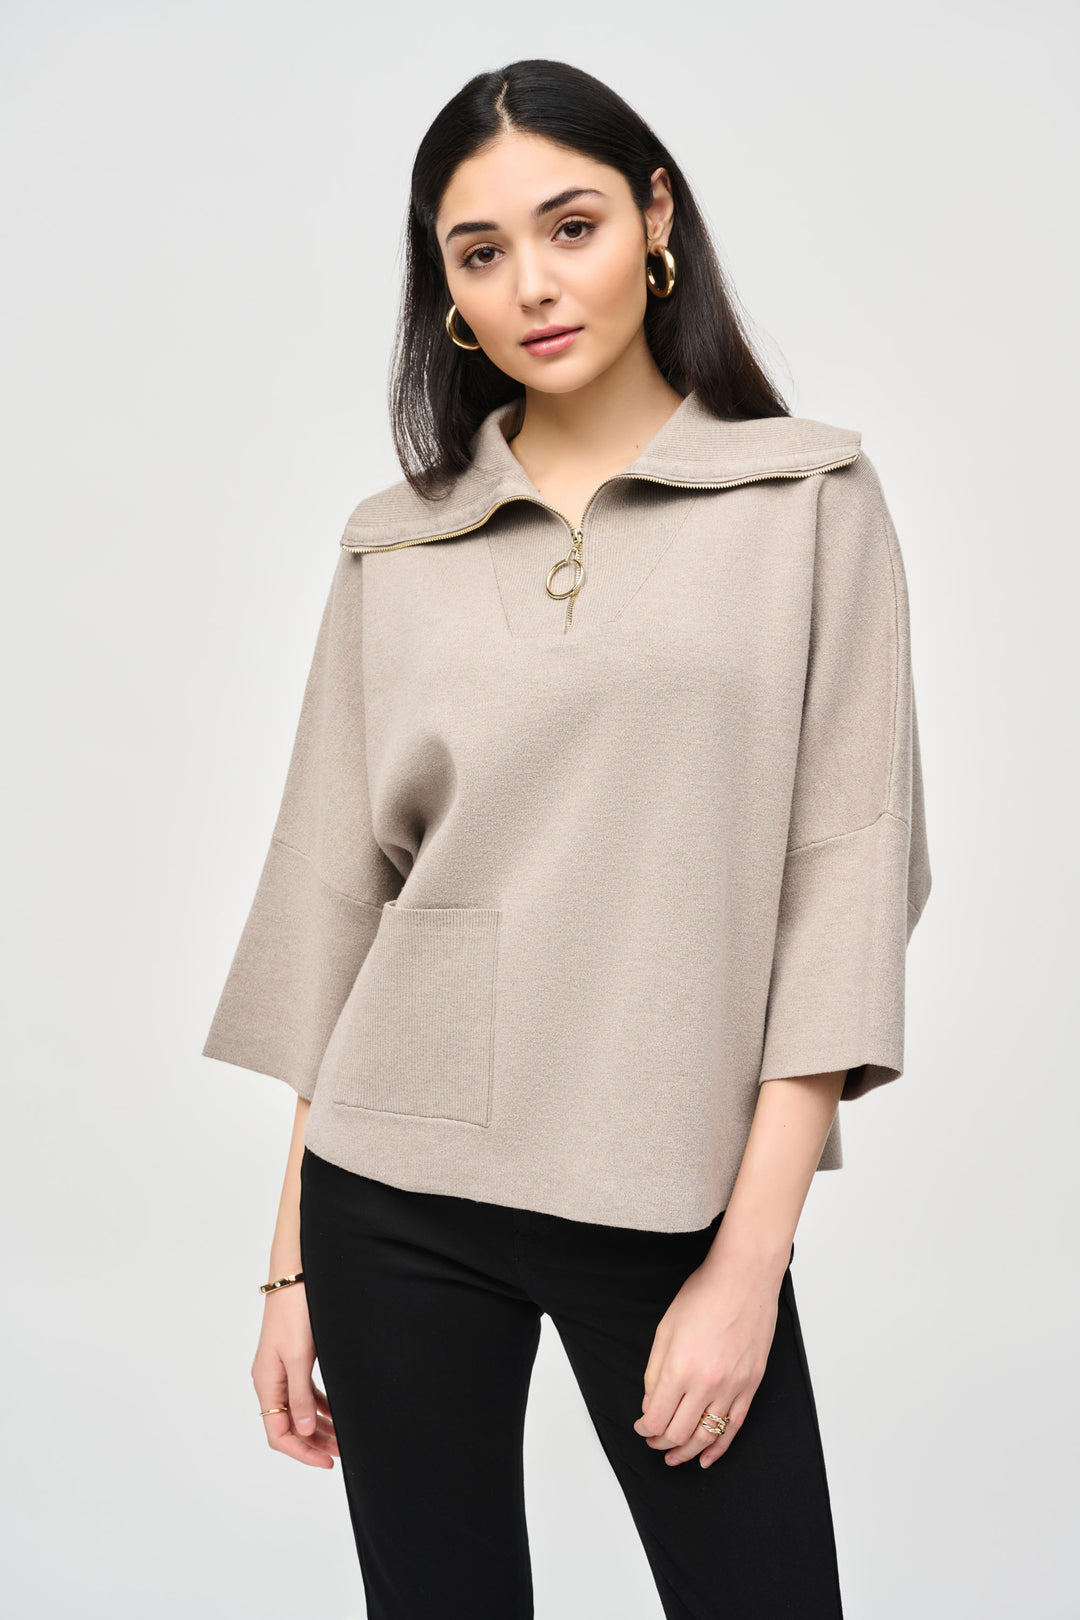 Joseph Ribkoff Fall 2024 With a boxy cut and elegant knit patch pocket, this sweater top is perfect for any occasion. The zip collar and 3/4 length sleeves add a touch of sophistication, while still being casual enough for everyday wear.